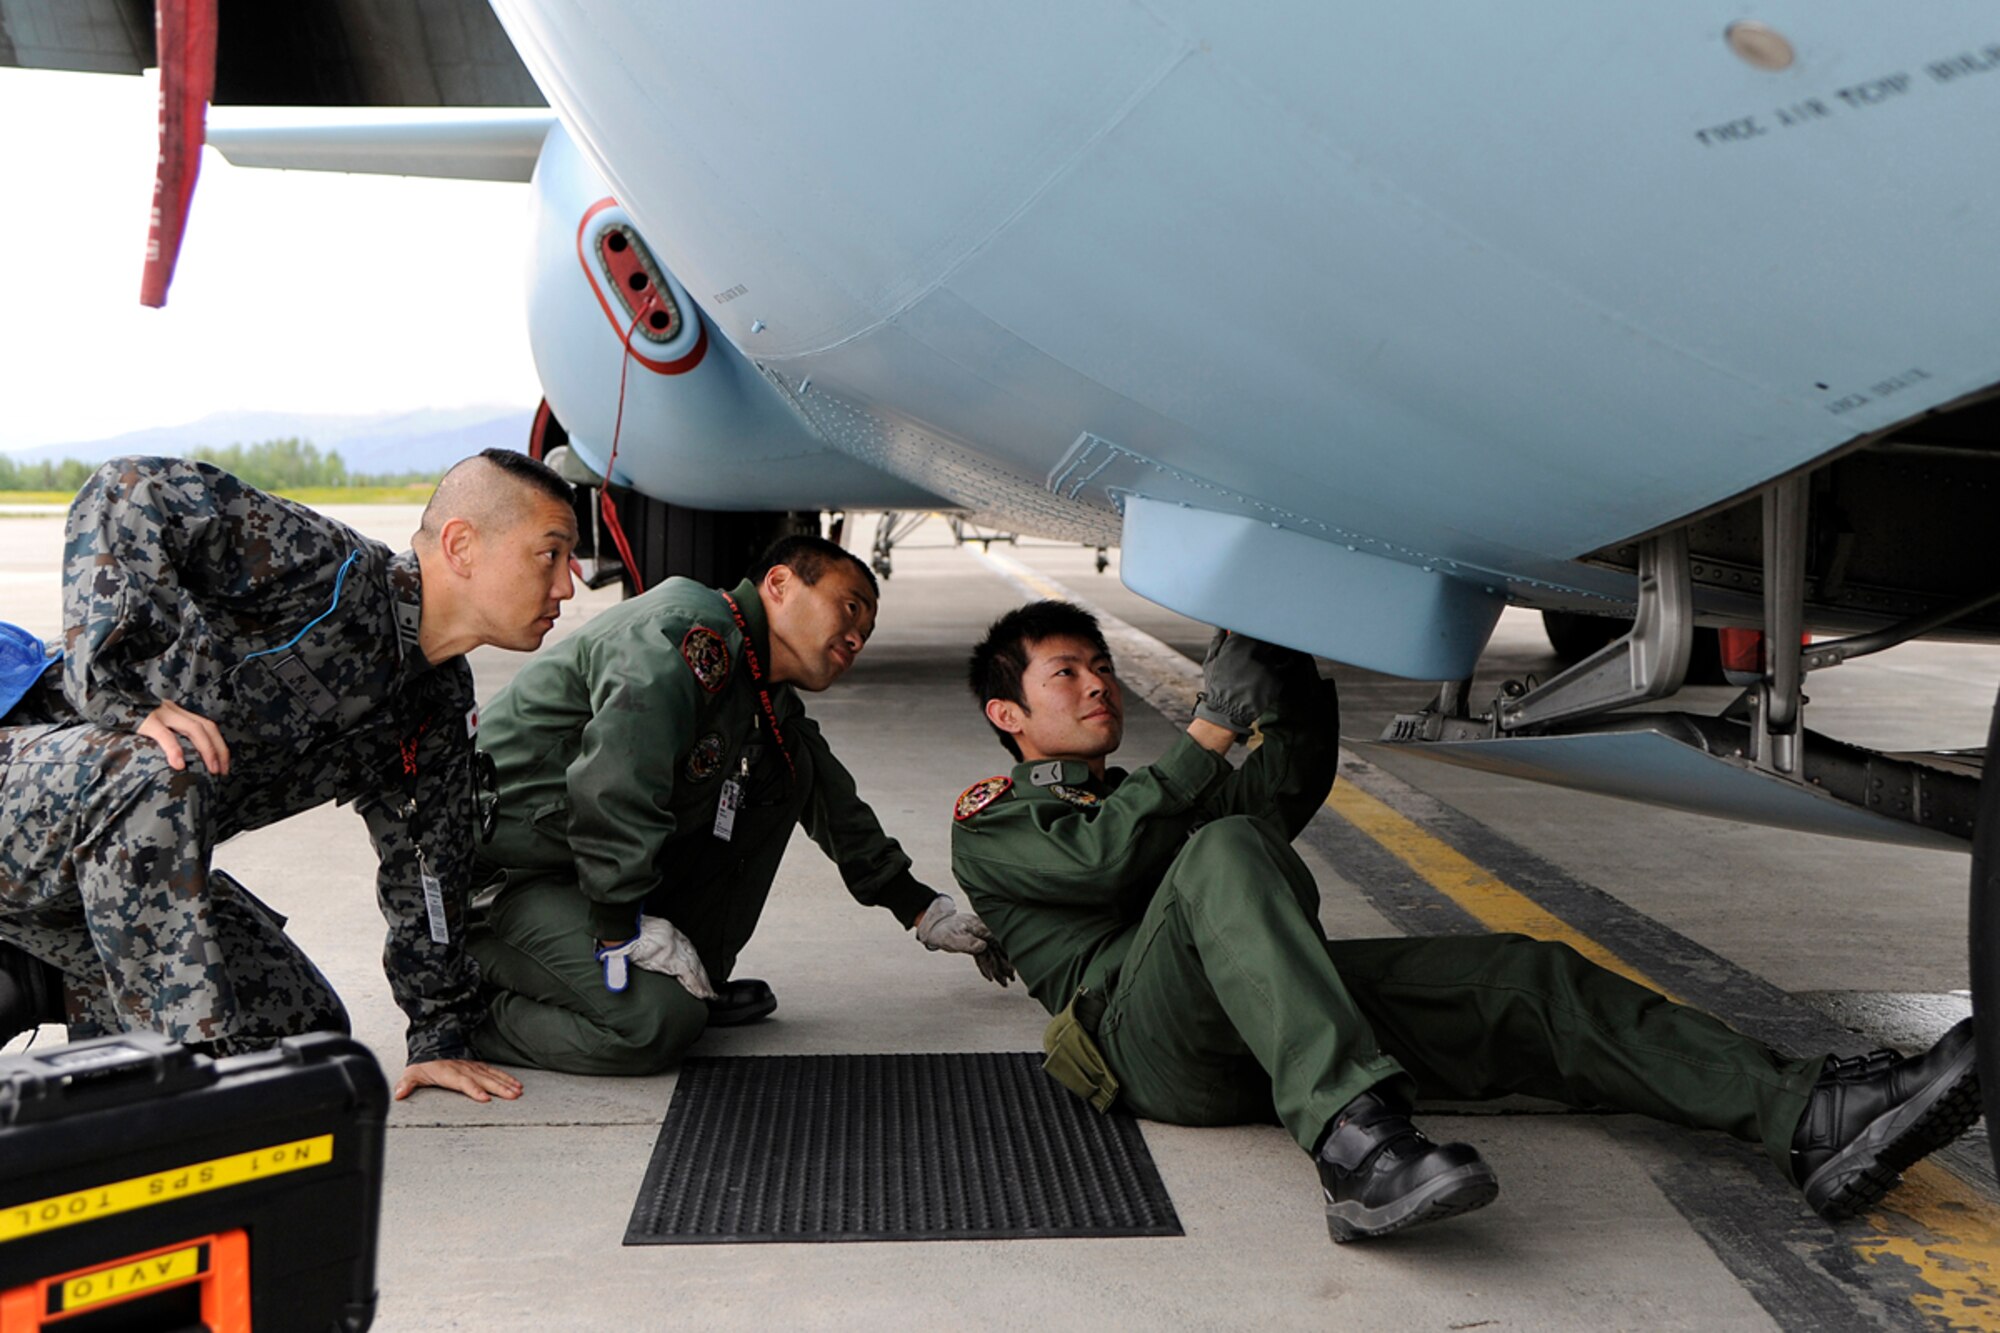 Members of the Japanese Air Self Defense Force work on a Japanese C-130 Hercules during Red Flag - Alaska on the flight line of Joint Base Elmendorf-Richardson, Alaska June 19. The C-130 Hercules offers a maximum speed of 600 kilometers an hour with a payload of 19,400 pounds and can be used for air drops. Red-Flag Alaska is designed to strengthen bilateral ties between nations and offers the JASDF the opportunity to improve aerial tactics. (U.S. Air Force photo/Staff Sgt. Zachary Wolf)